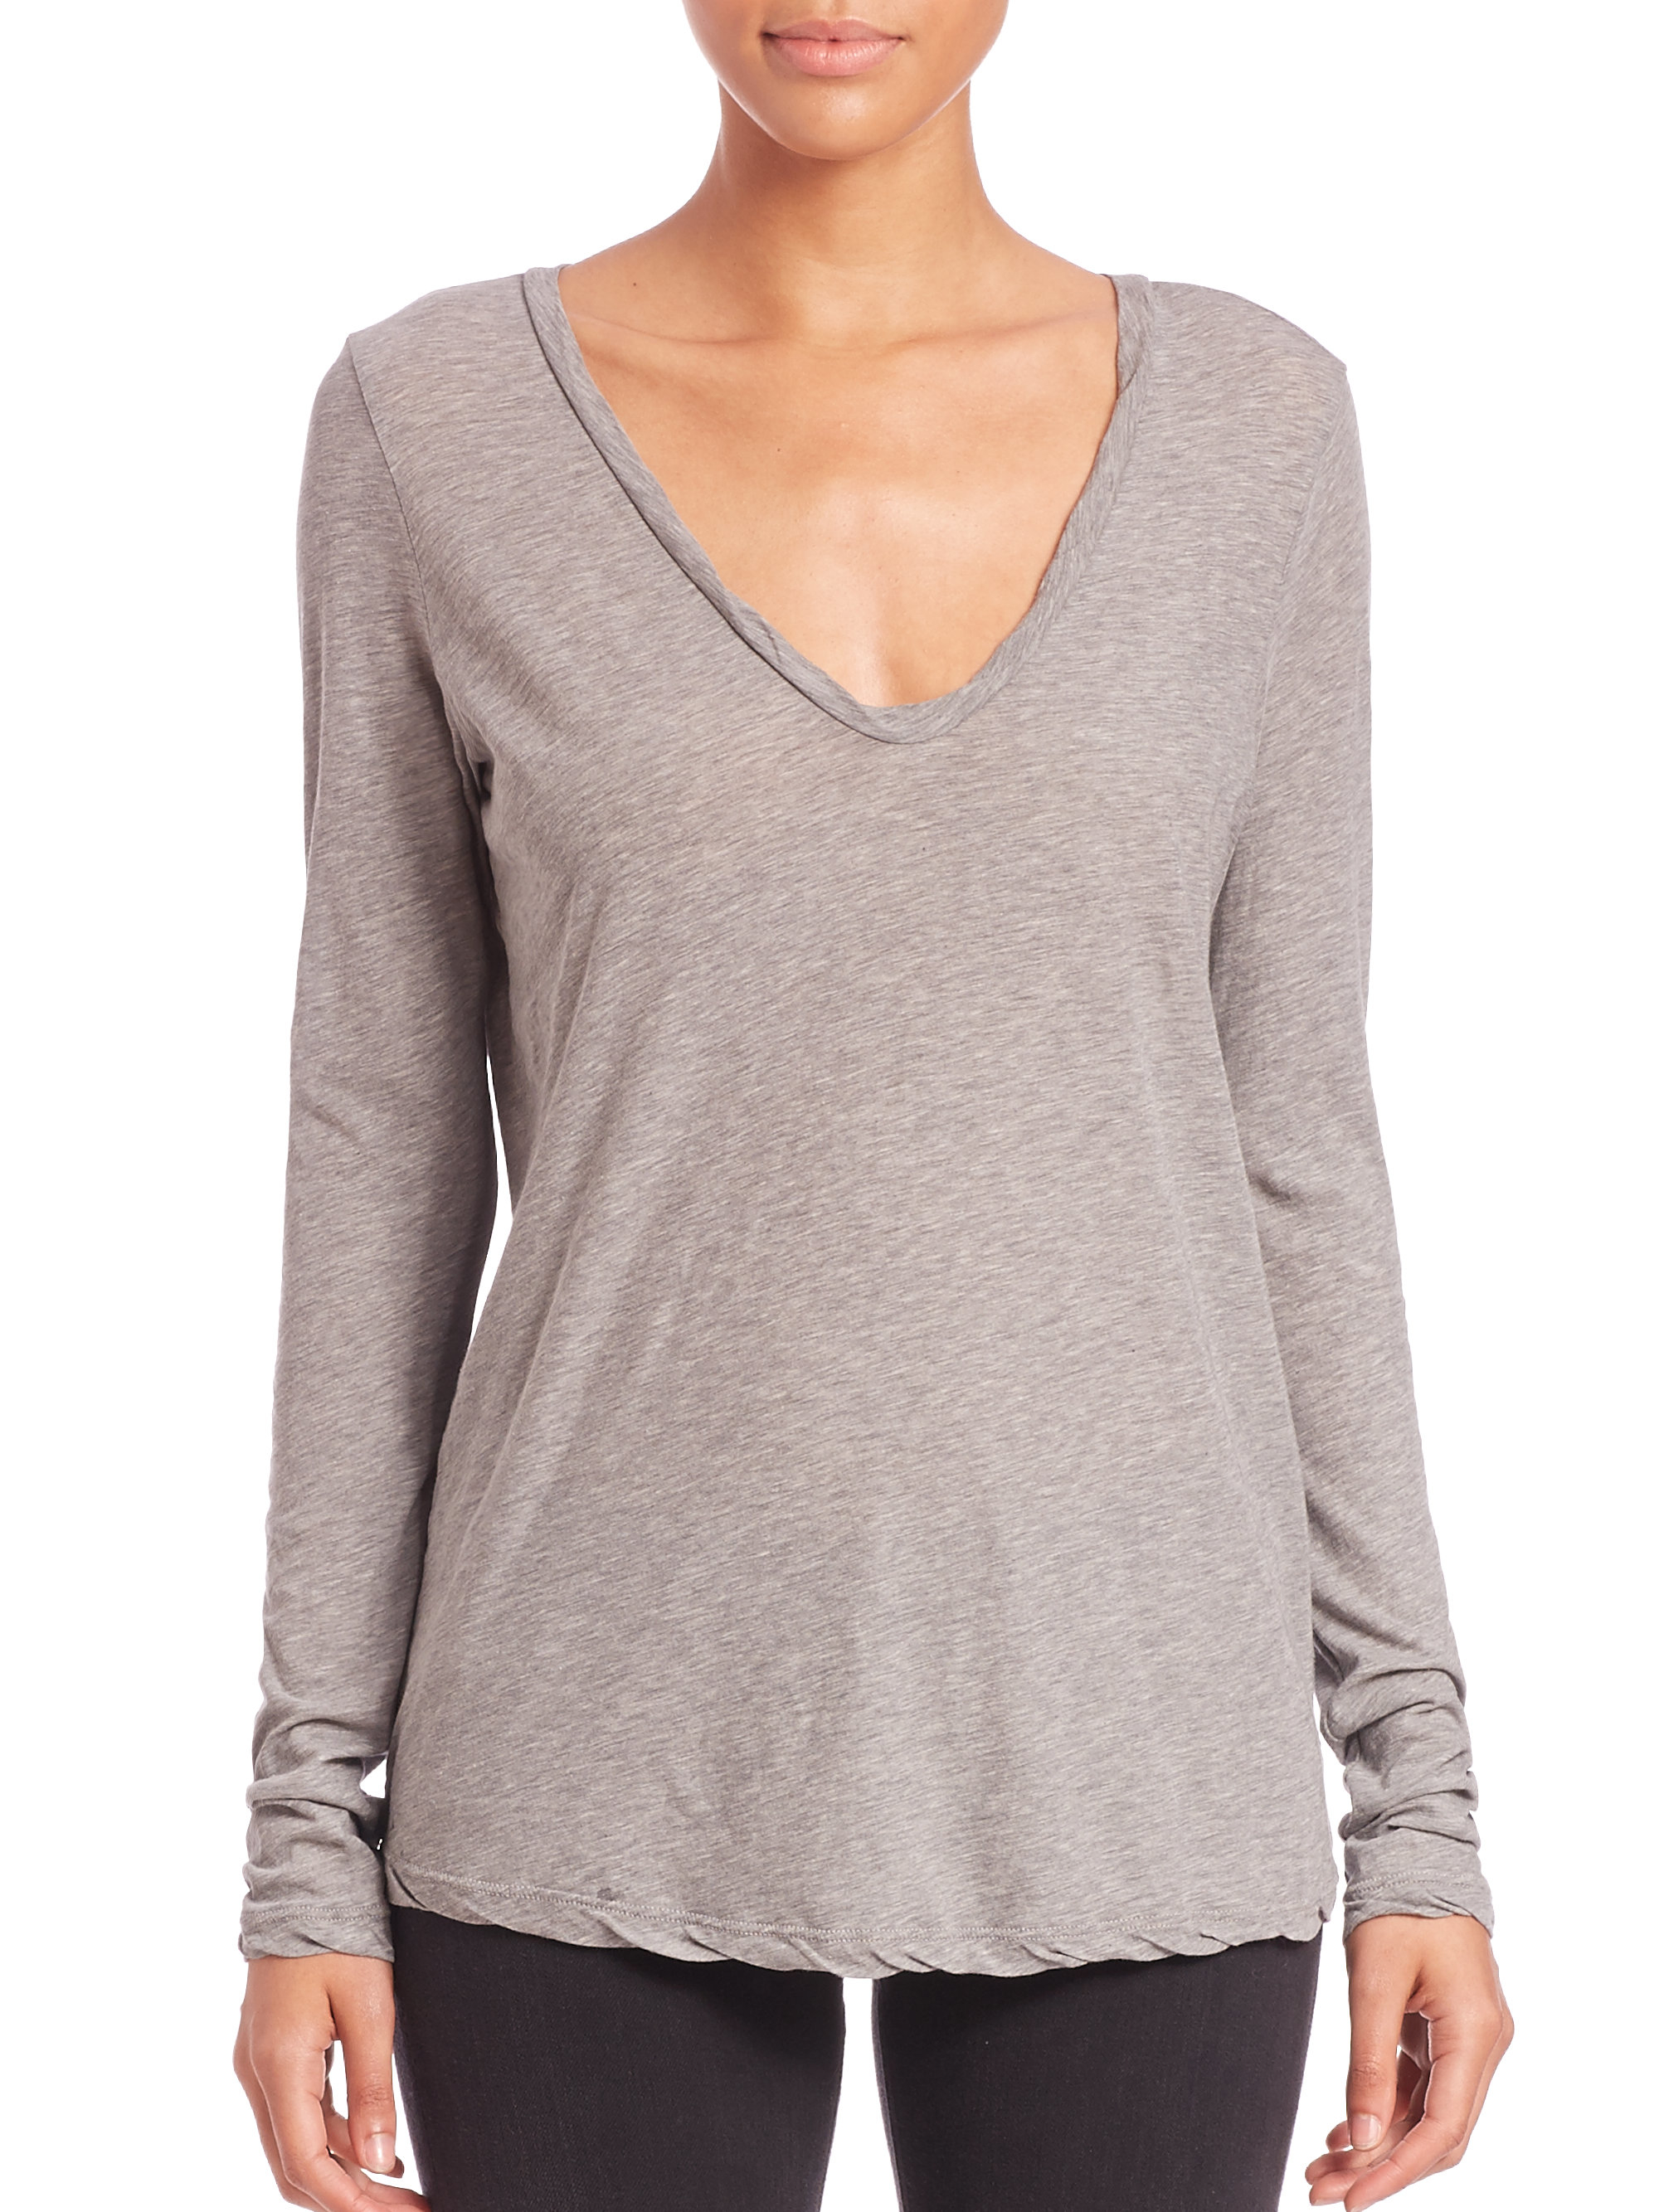 Lyst - James Perse Long-sleeve Jersey Top in Gray